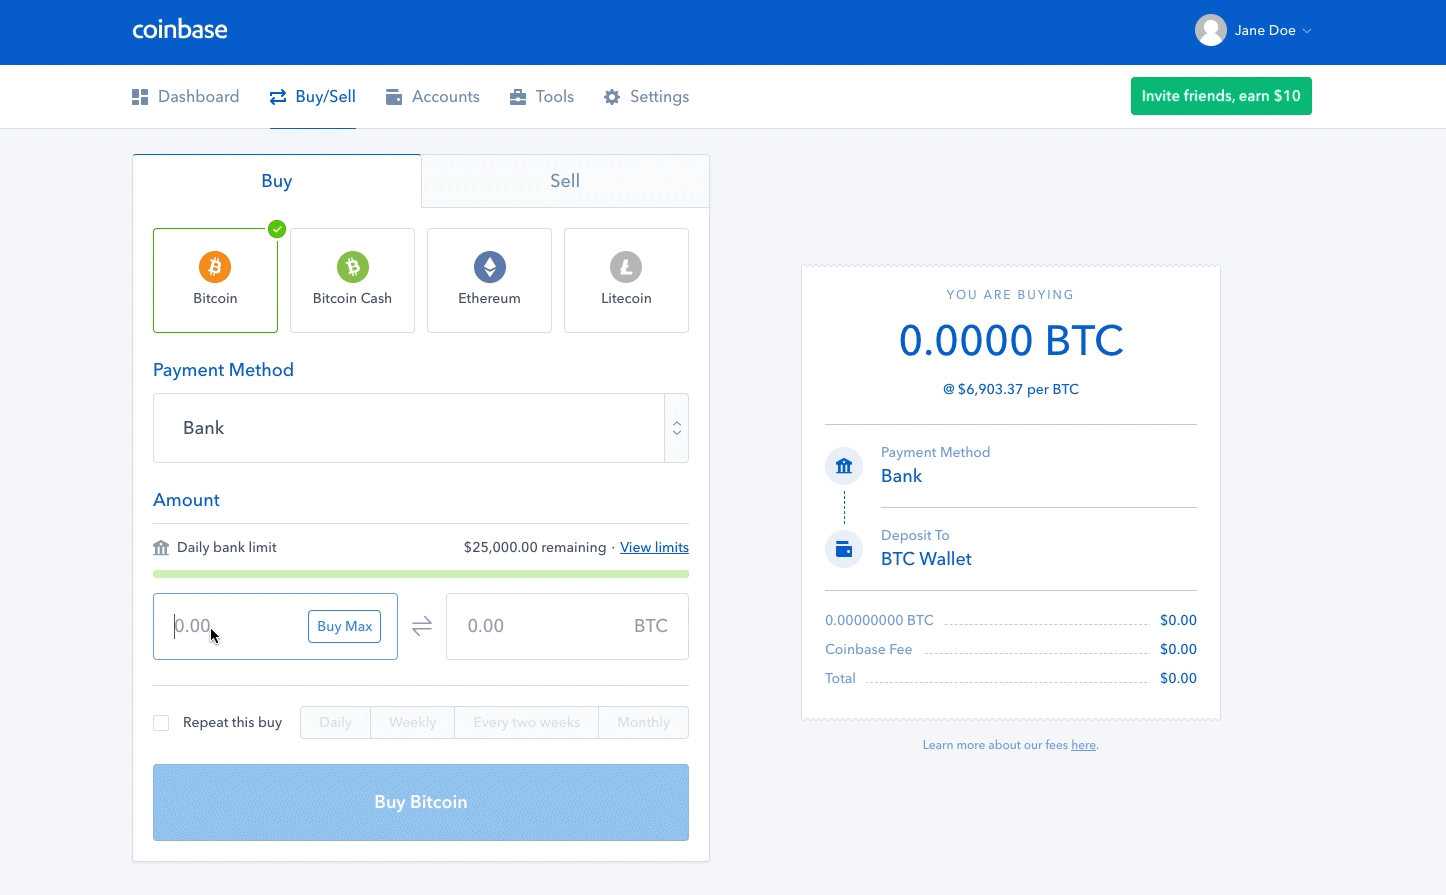 How to Withdraw From Coinbase Wallet: A Step-by-Step Guide